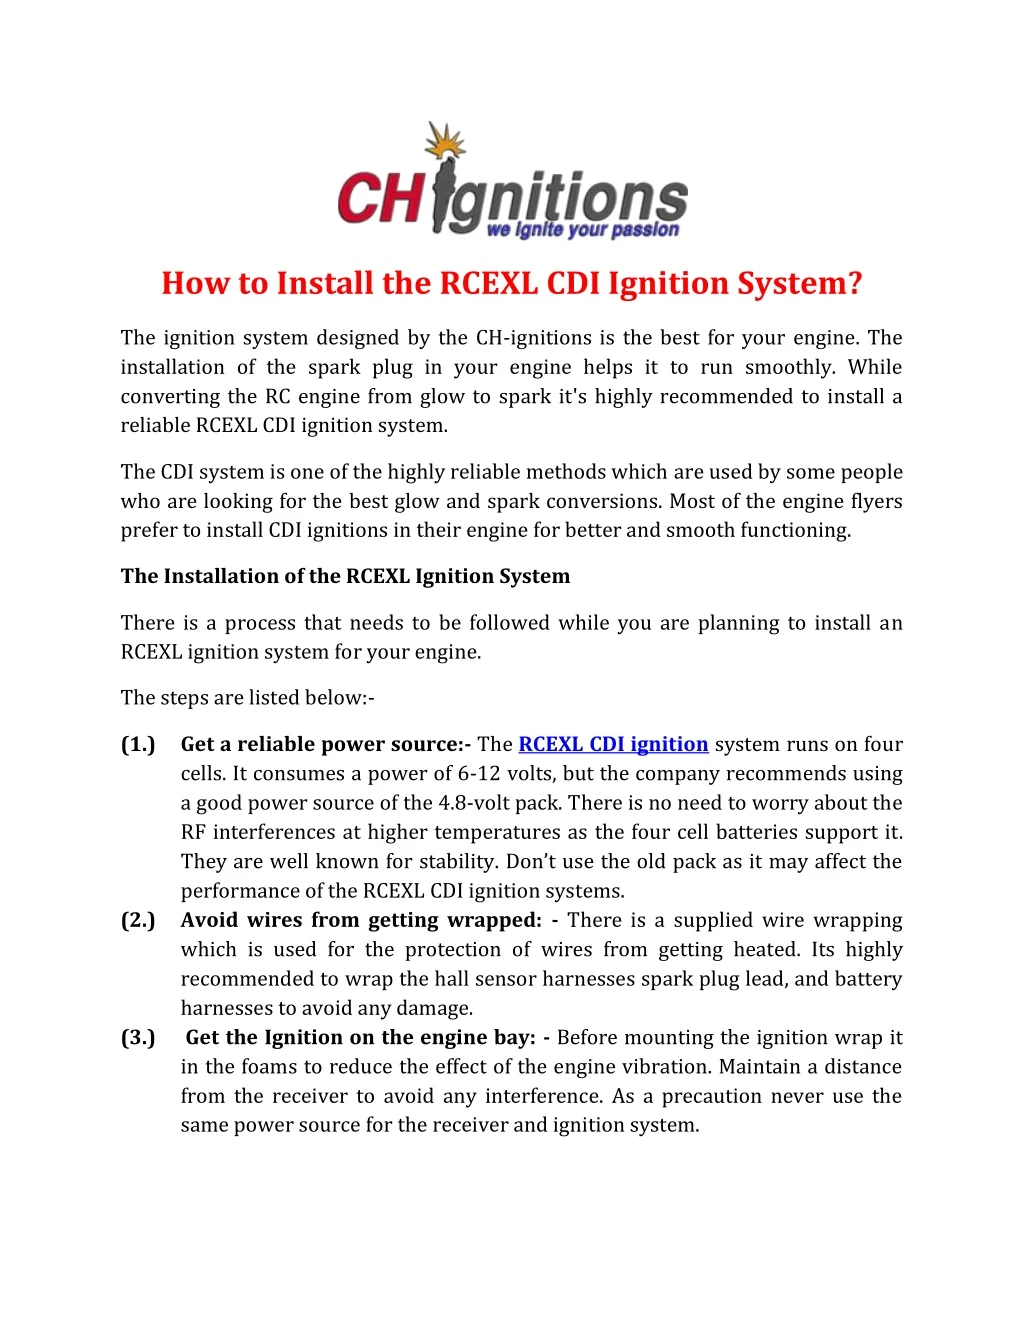 how to install the rcexl cdi ignition system